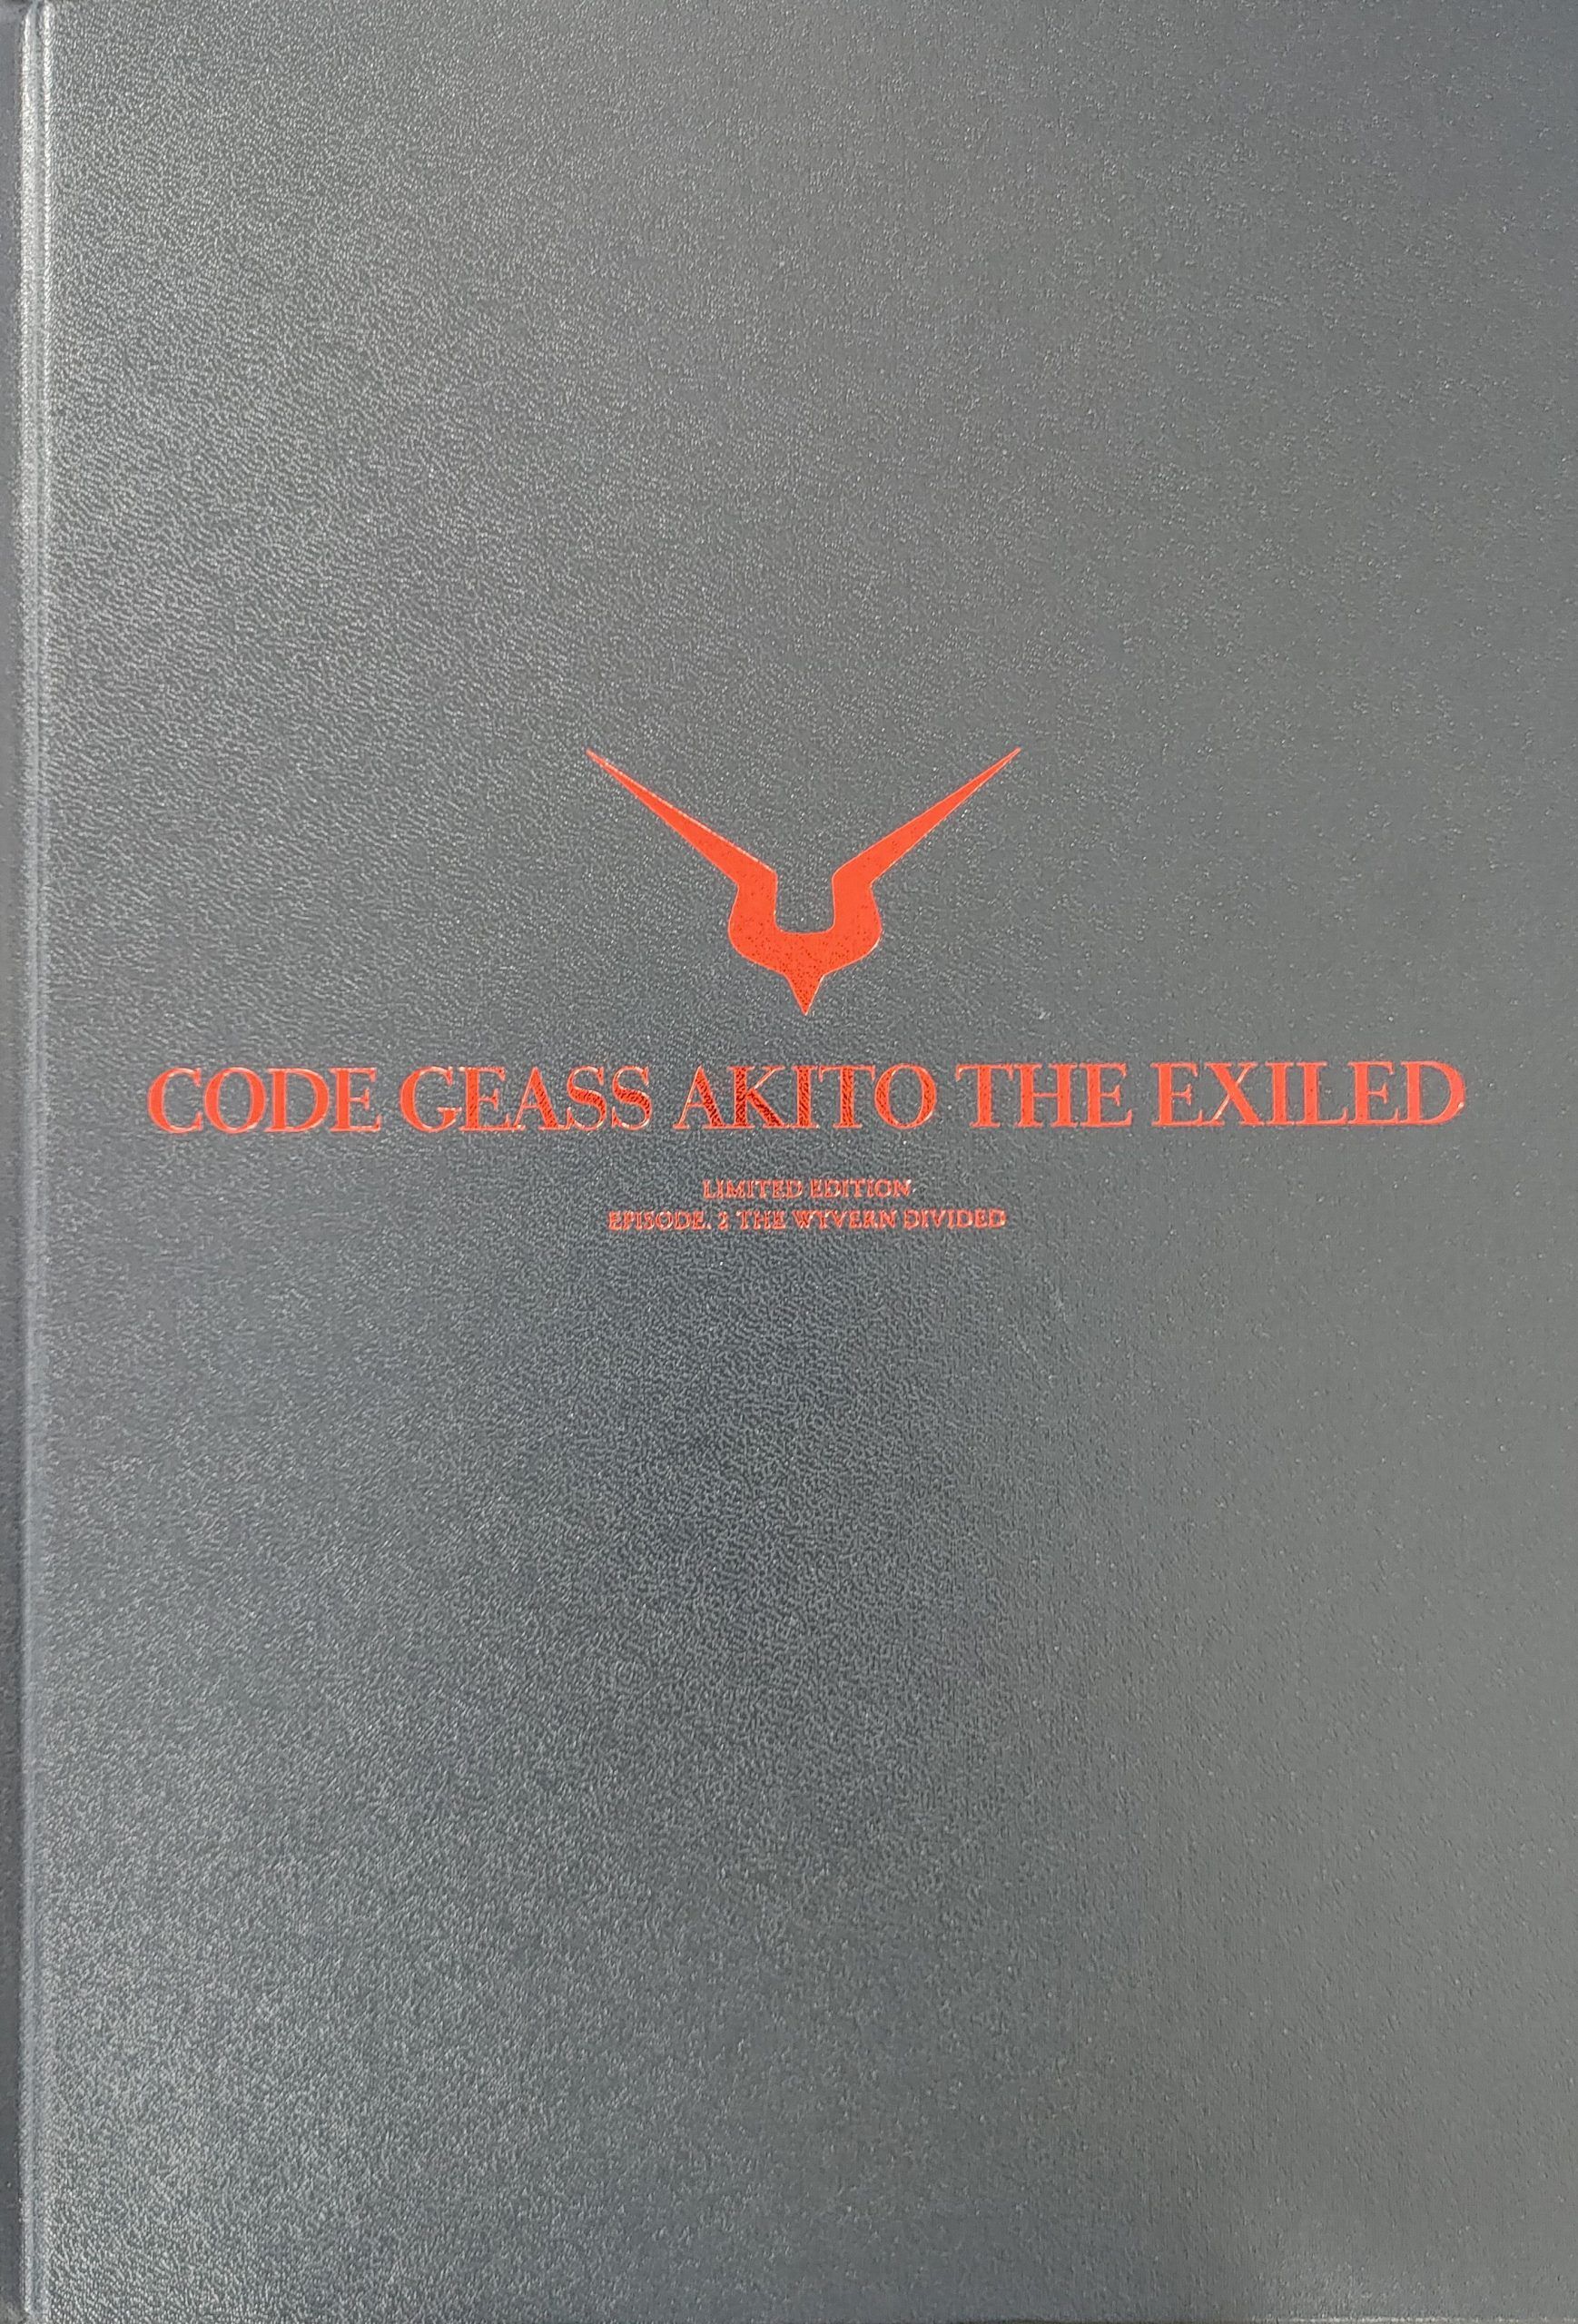 (BOOK) CODE GEASS AKITO THE EXILED – Limited edition –  Episode 2 The Wyvern Divided